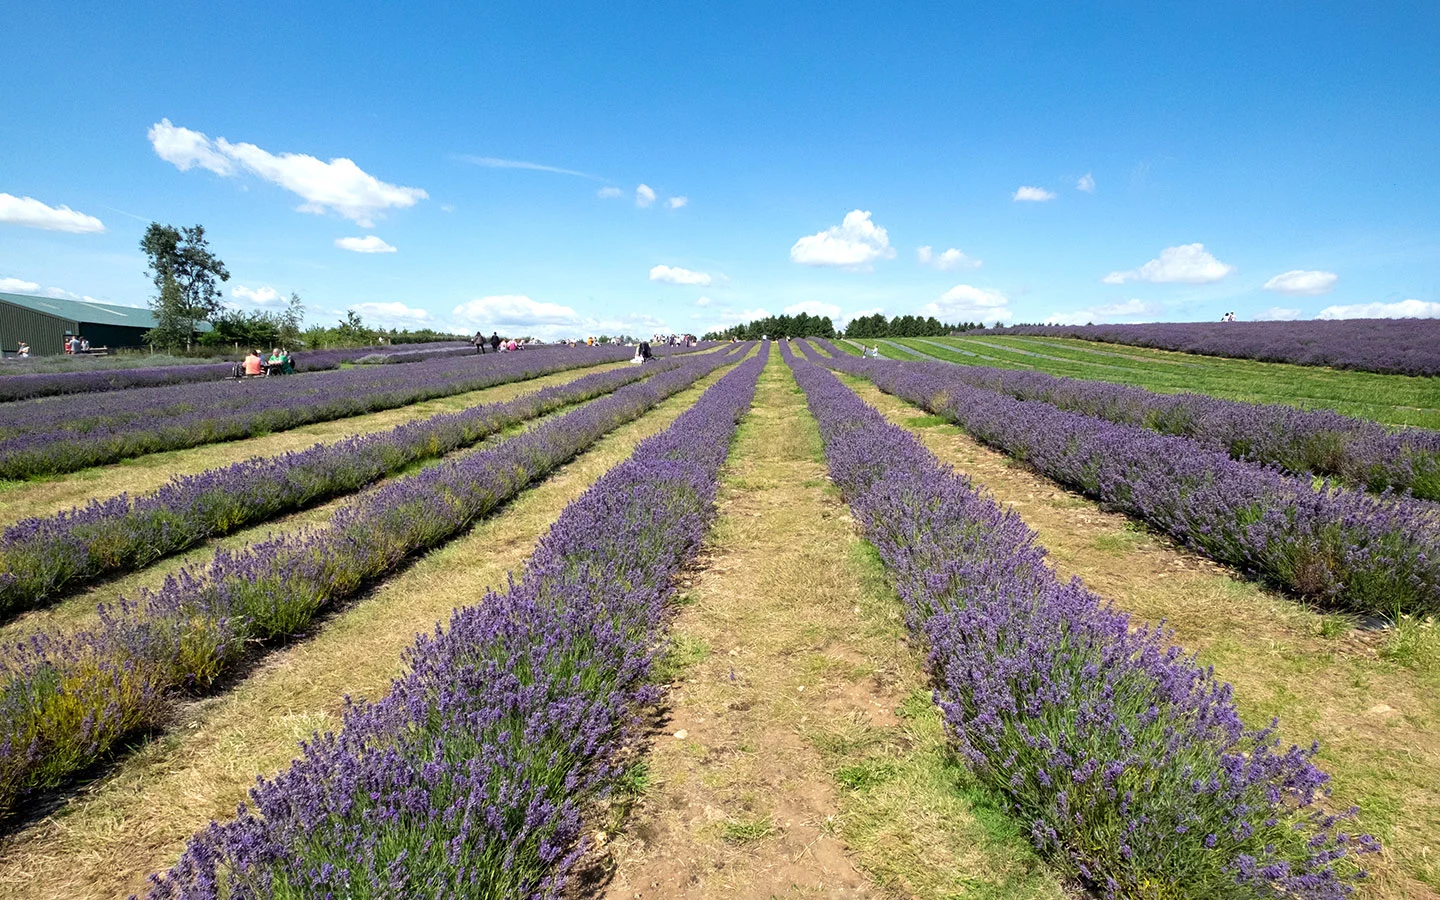 Exploring the Cotswold Lavender fields